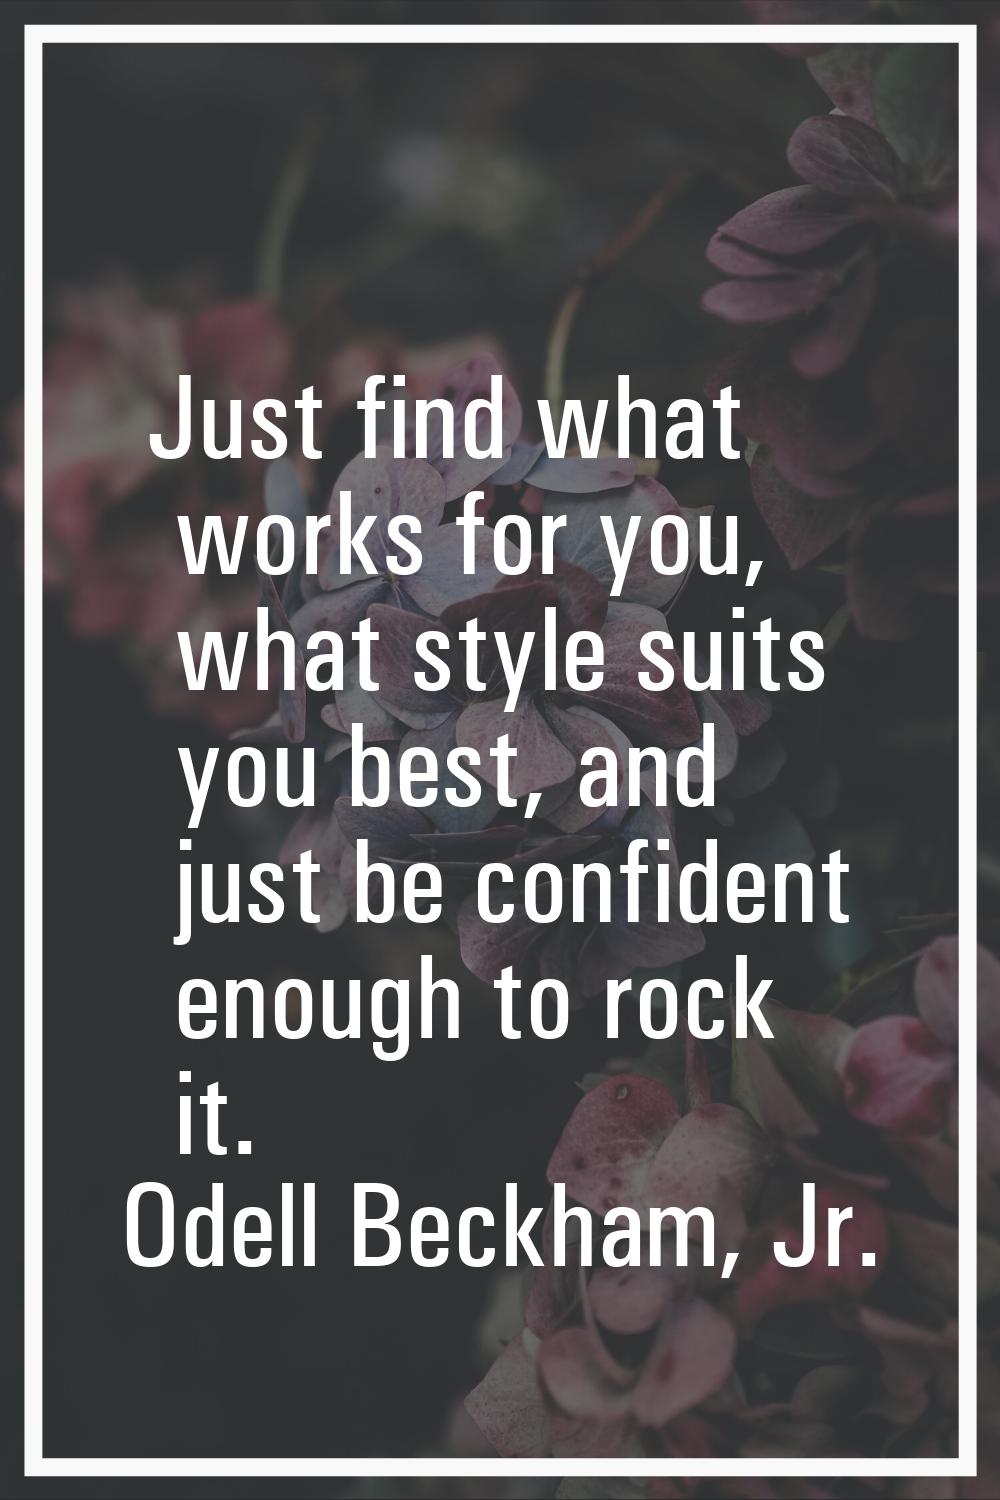 Just find what works for you, what style suits you best, and just be confident enough to rock it.